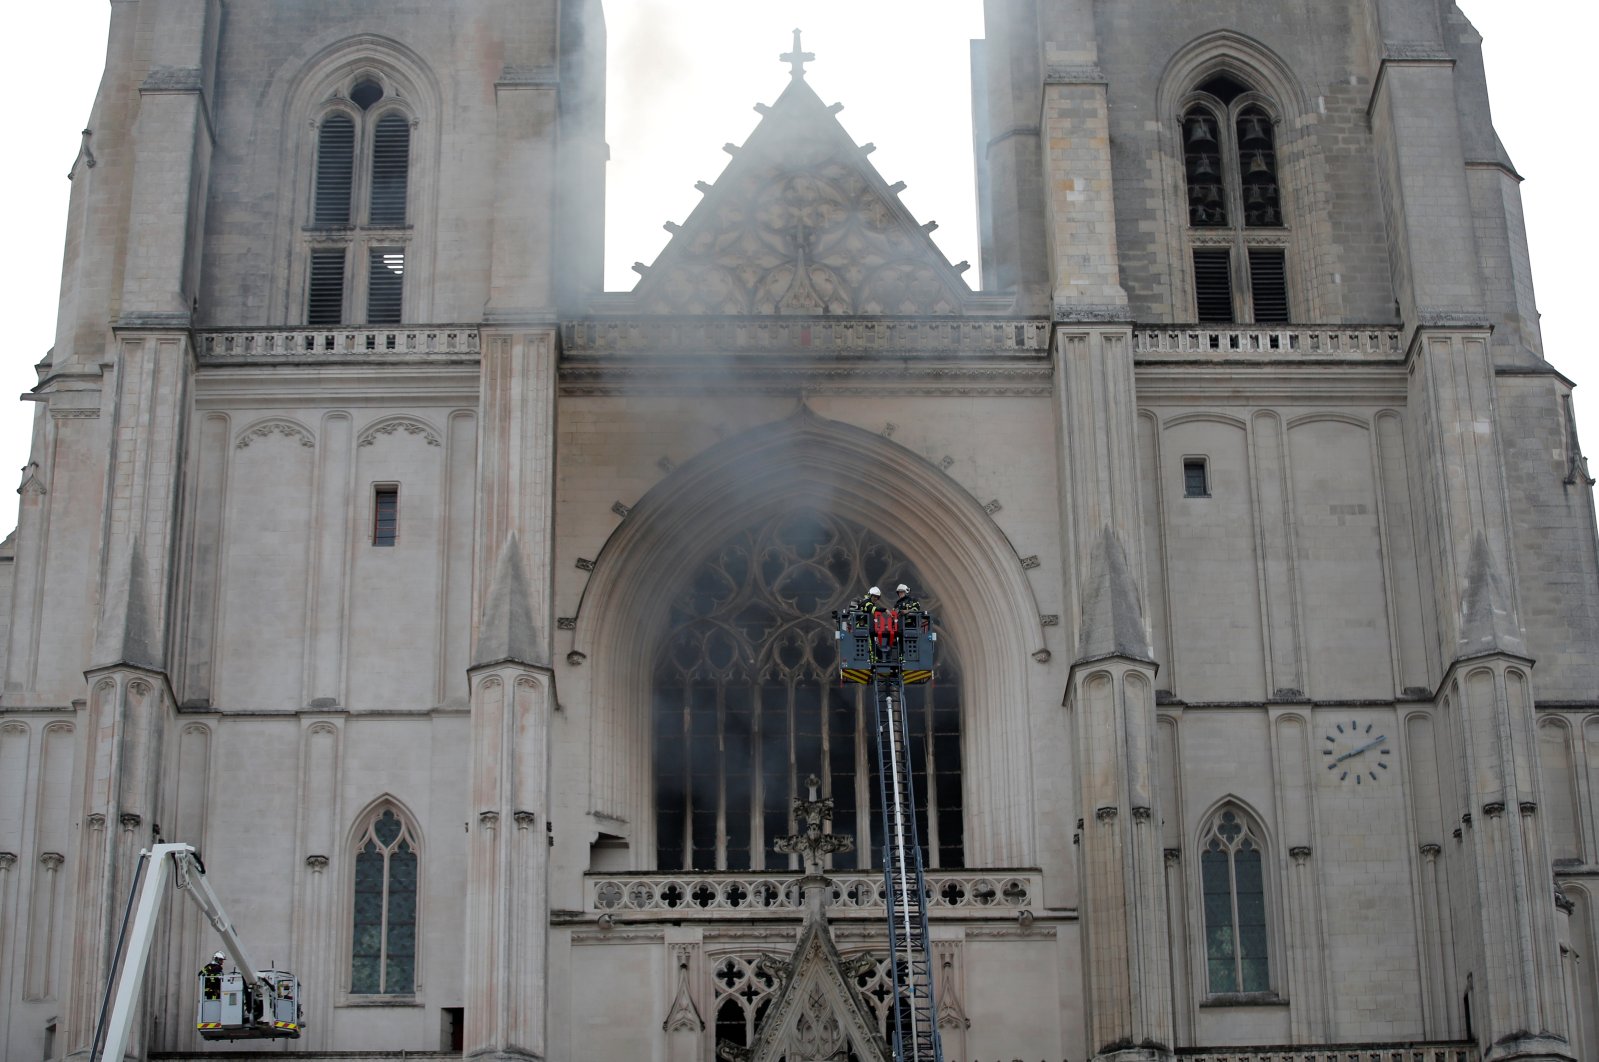 French firefighters battle a blaze at the Cathedral of Saint Pierre and Saint Paul in Nantes, France, July 18, 2020. (Reuters Photo)